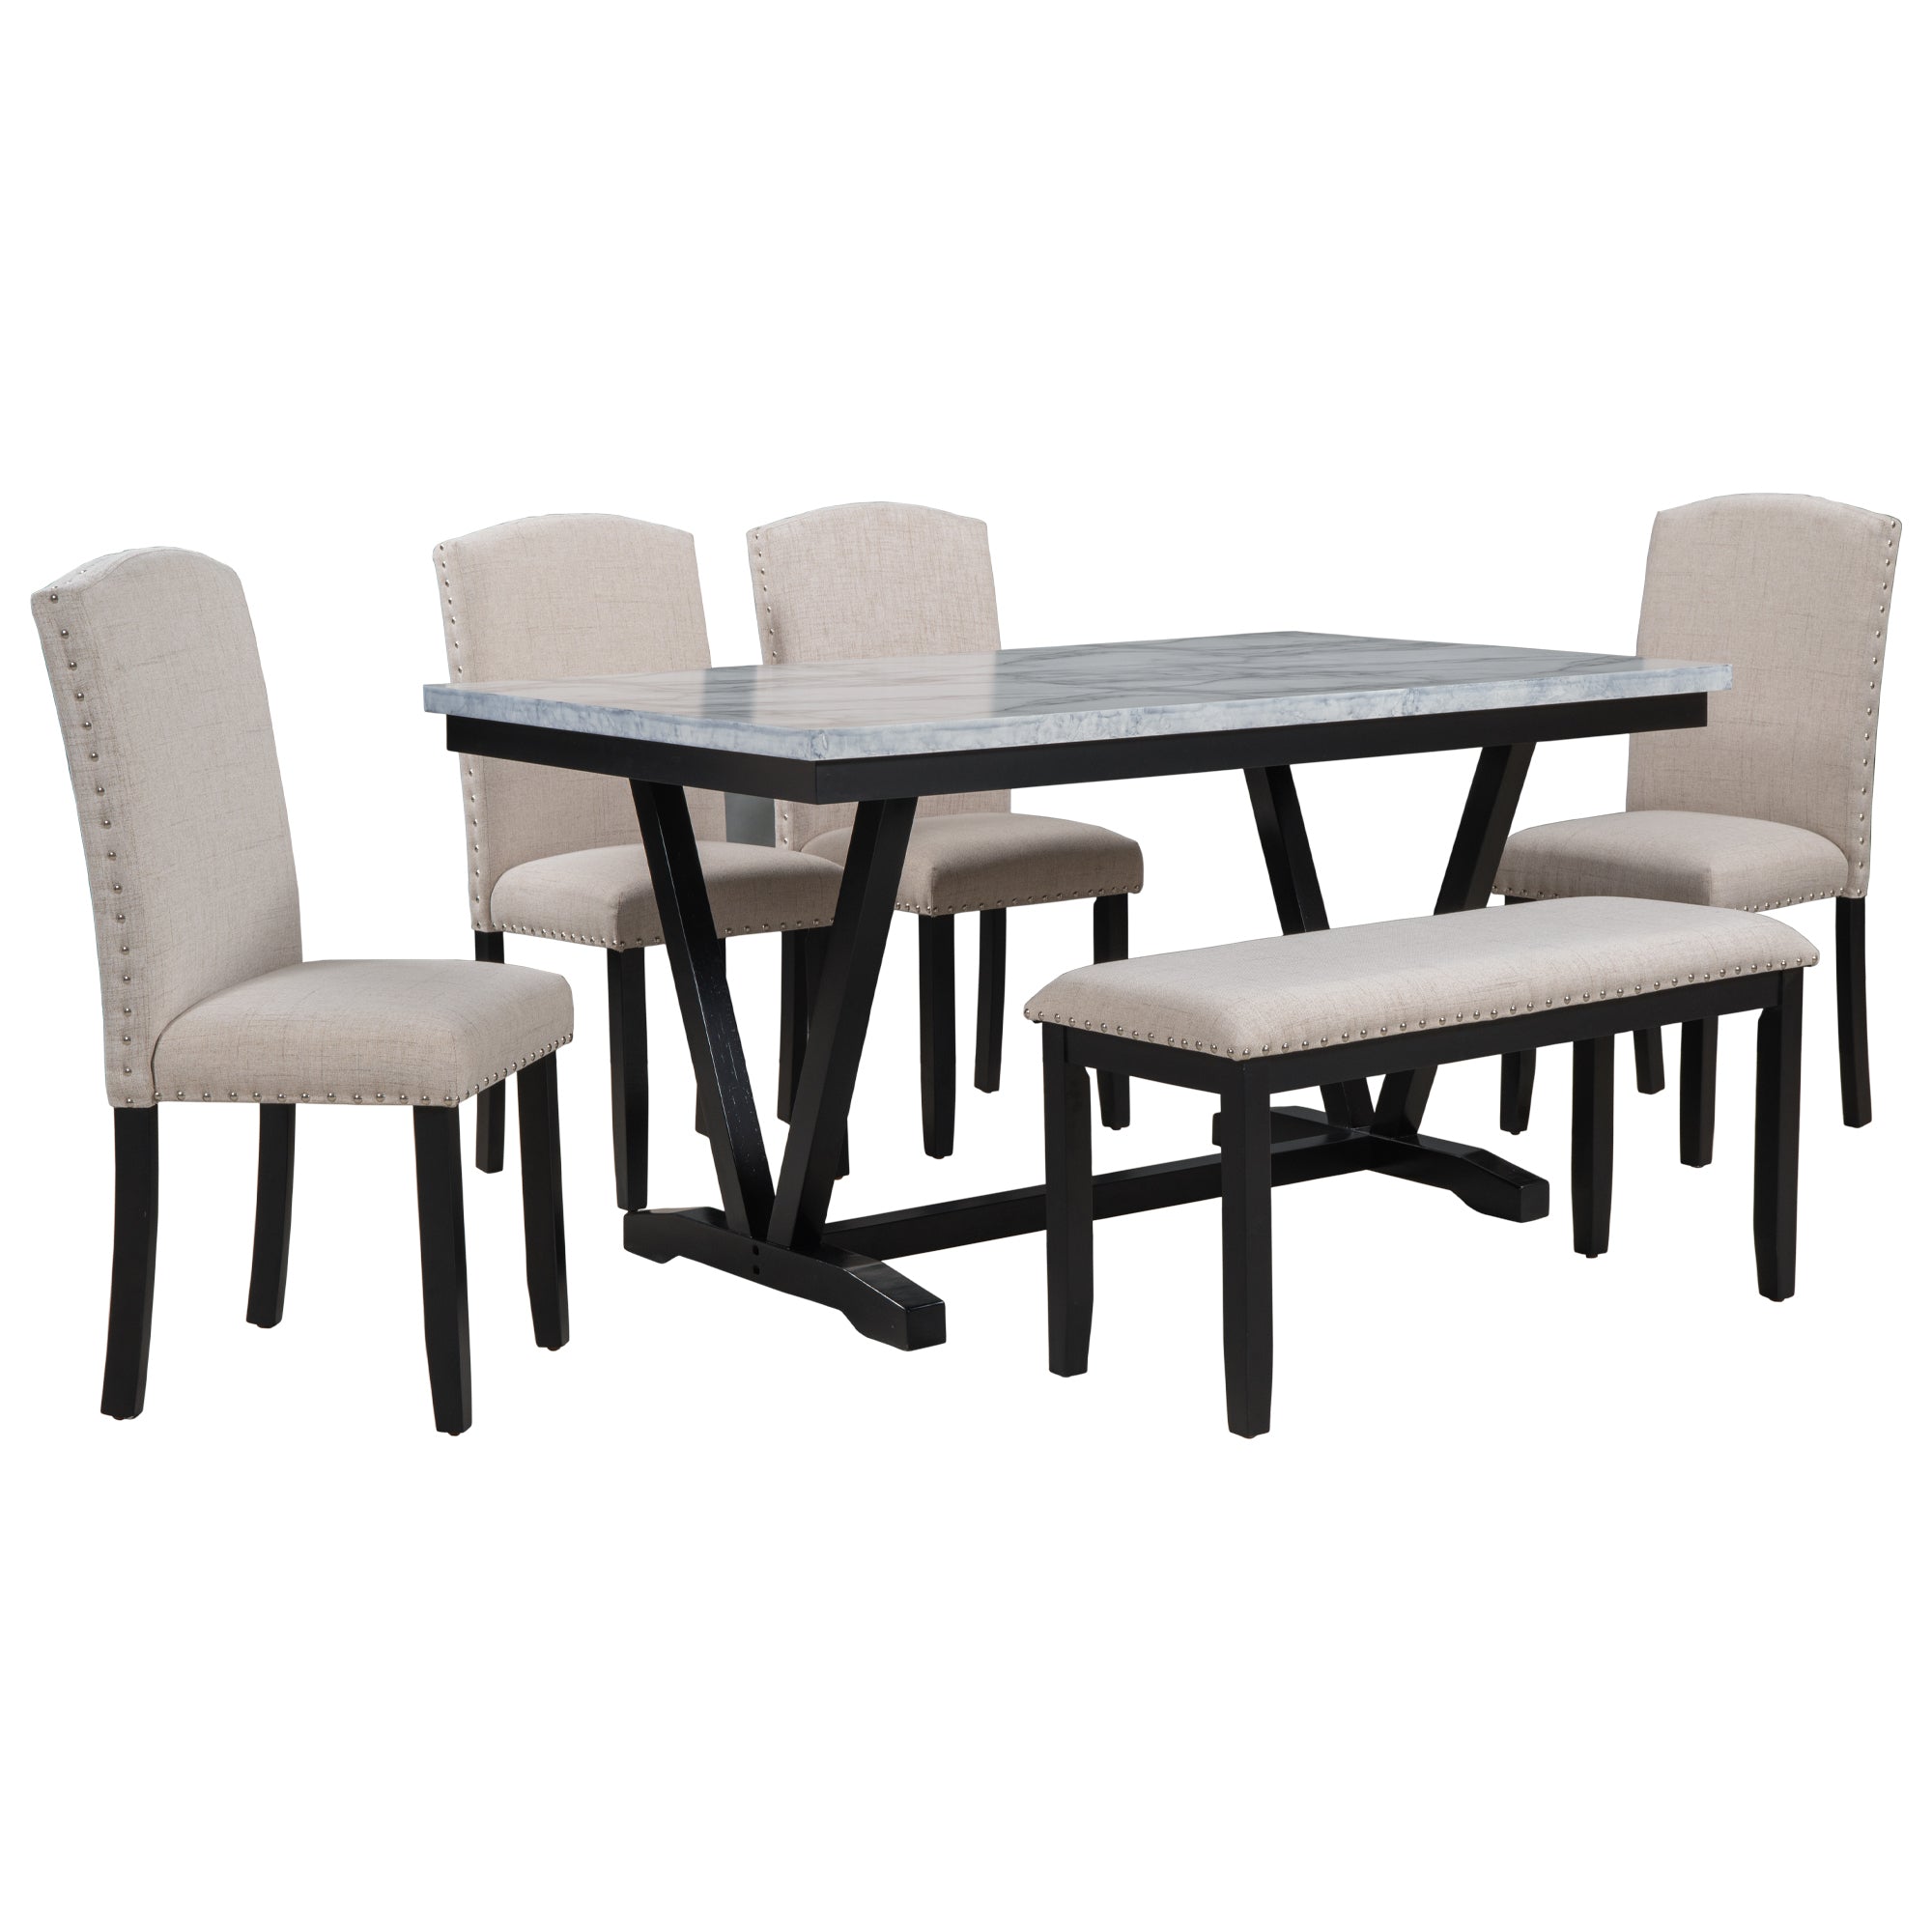 TREXM 6-piece Dining Table with 4 Chairs and 1 Bench, Table with Marble Veneer Top and V-shaped Legs (white)